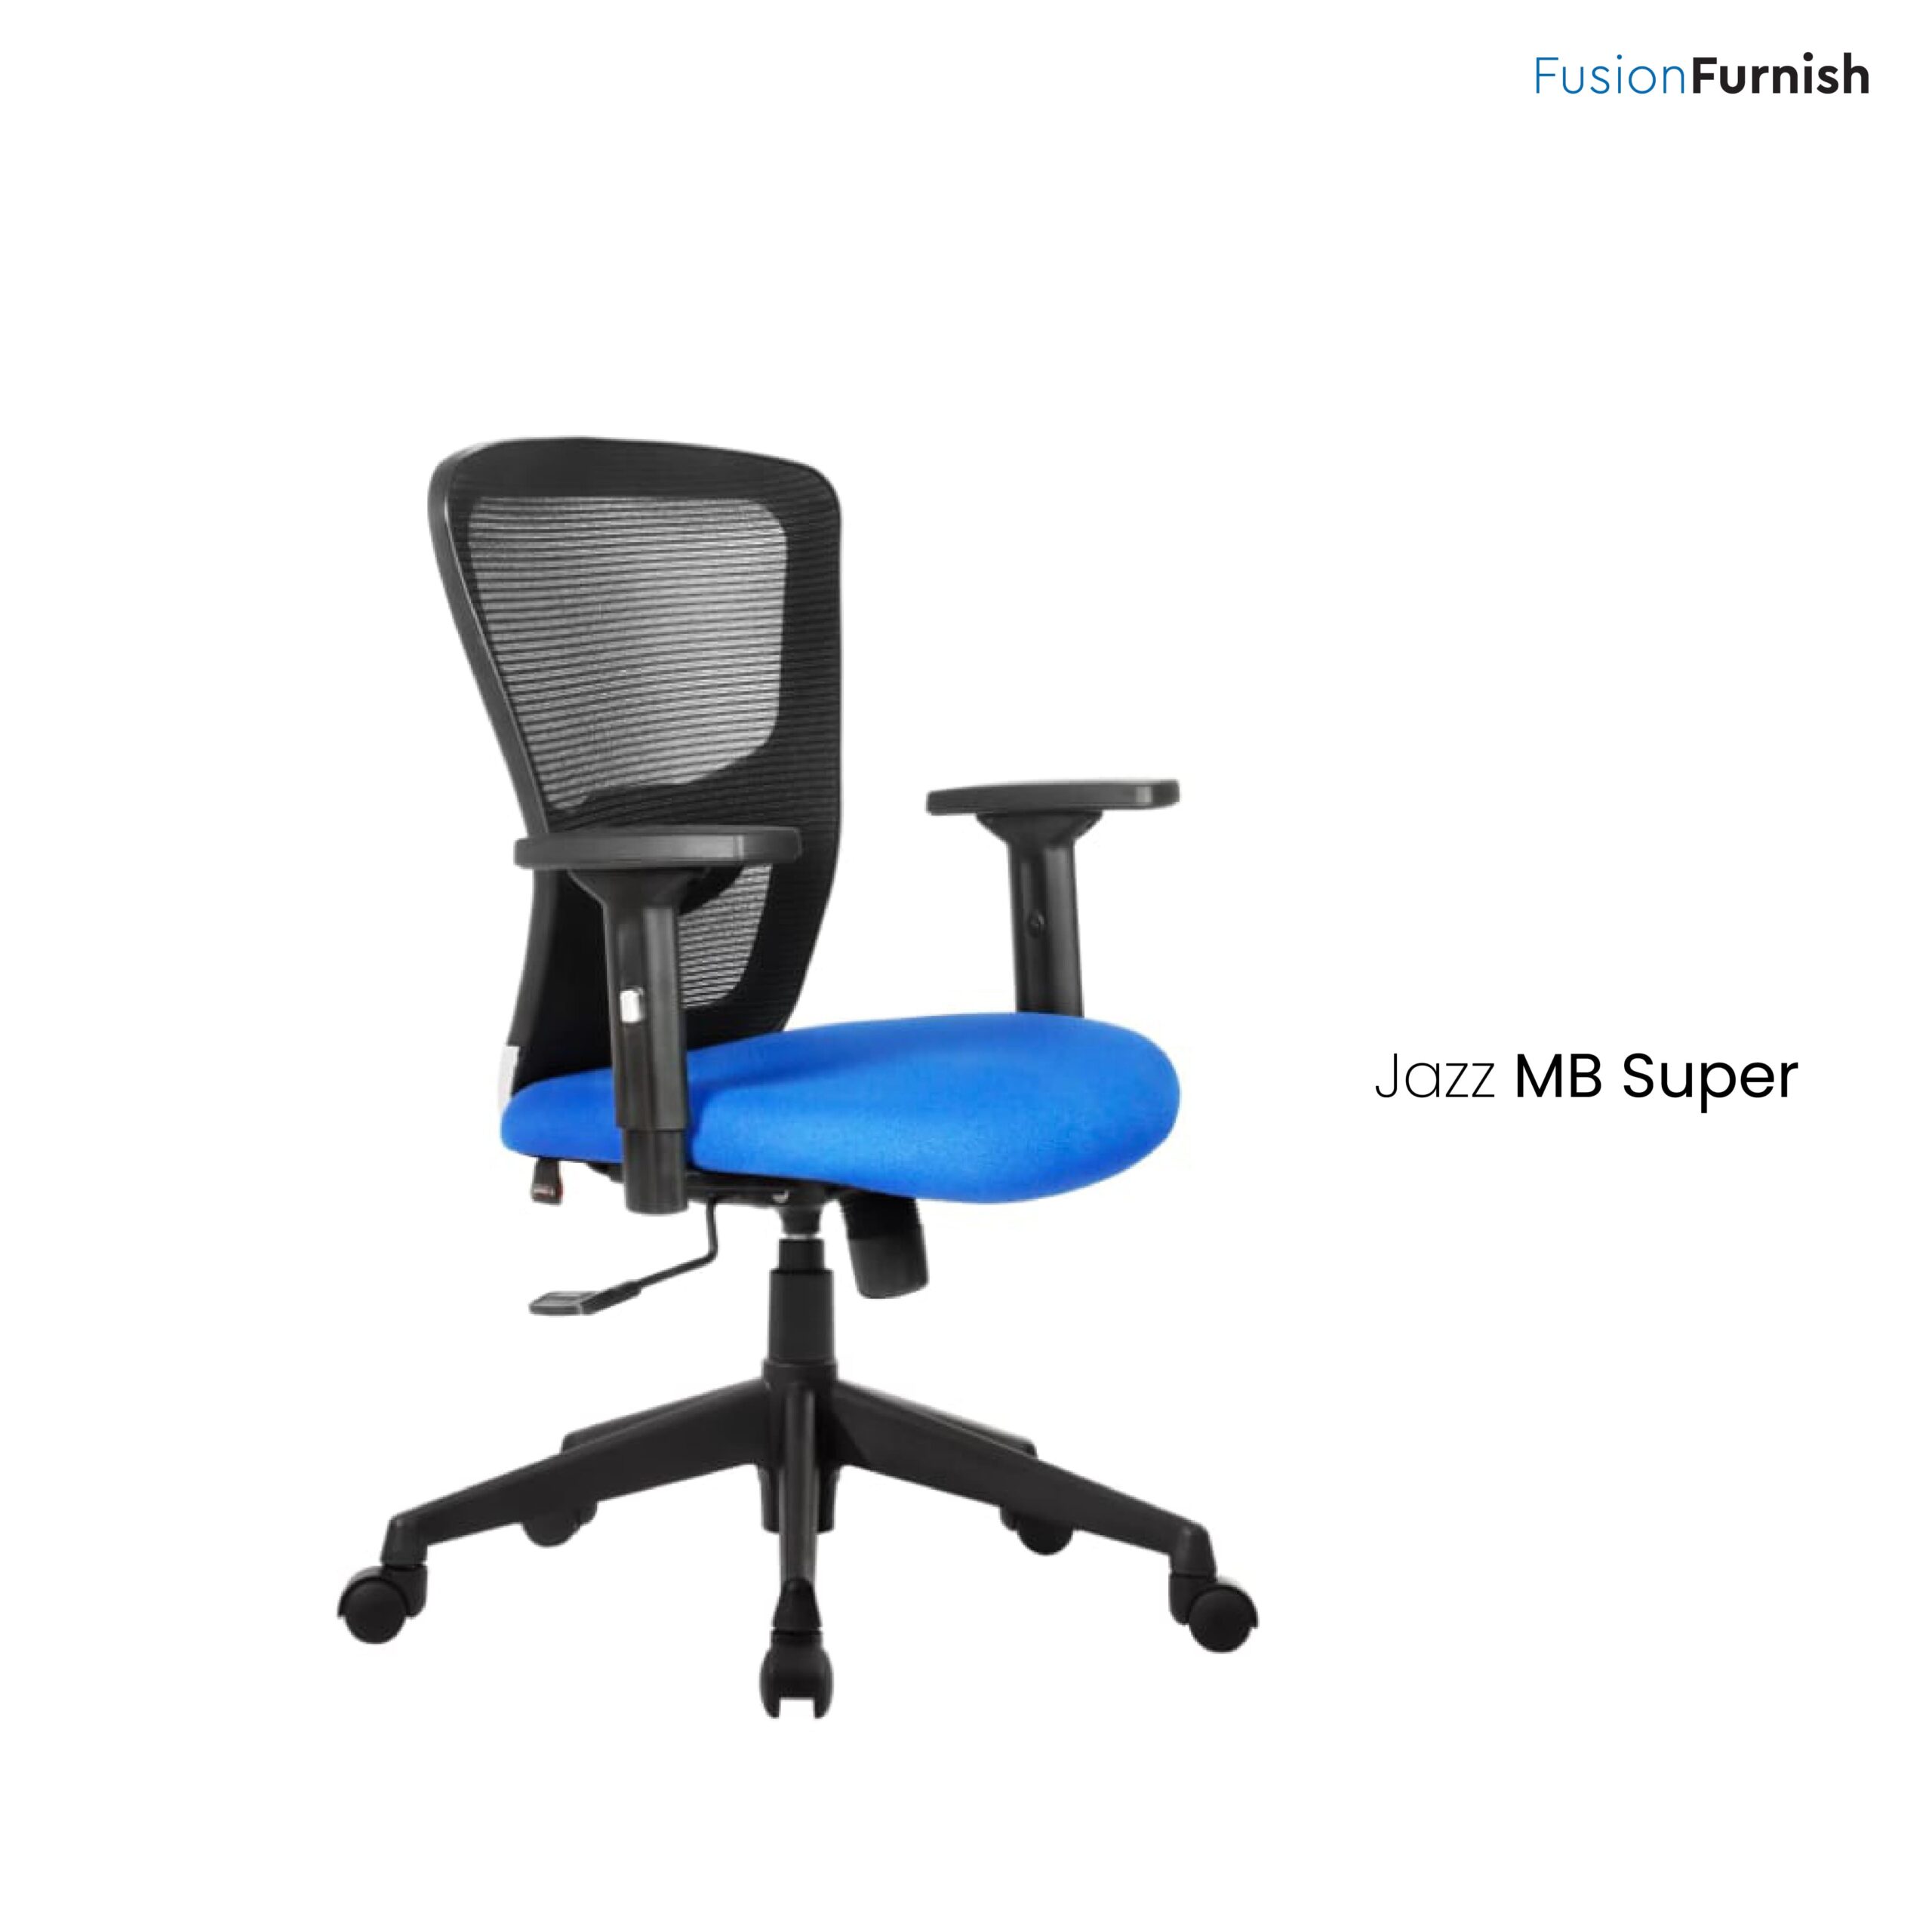 JAZZ MB SUPEROur Jazz series of desk chairs are specially designed to give lumbar support, and an adjustable armrest and brake mechanism offer utmost comfort and stability even when you need to work nonstop.